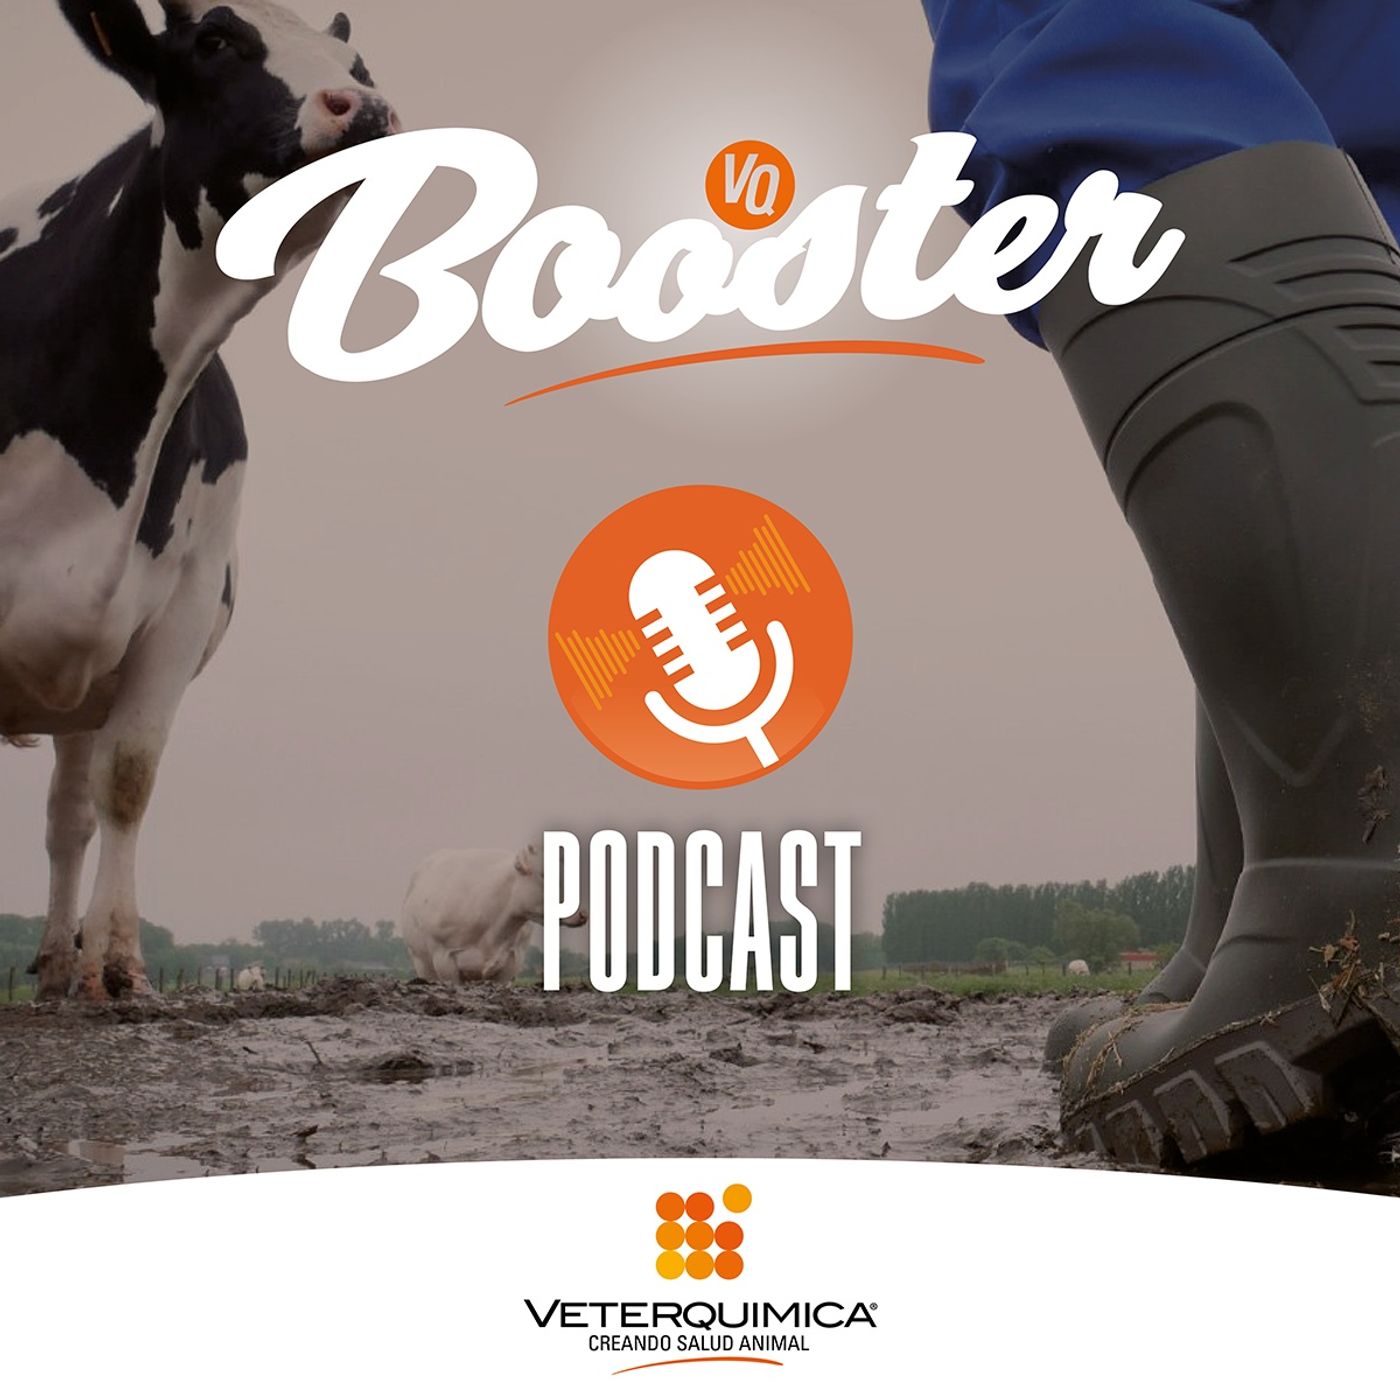 Booster Podcast Veterquimica